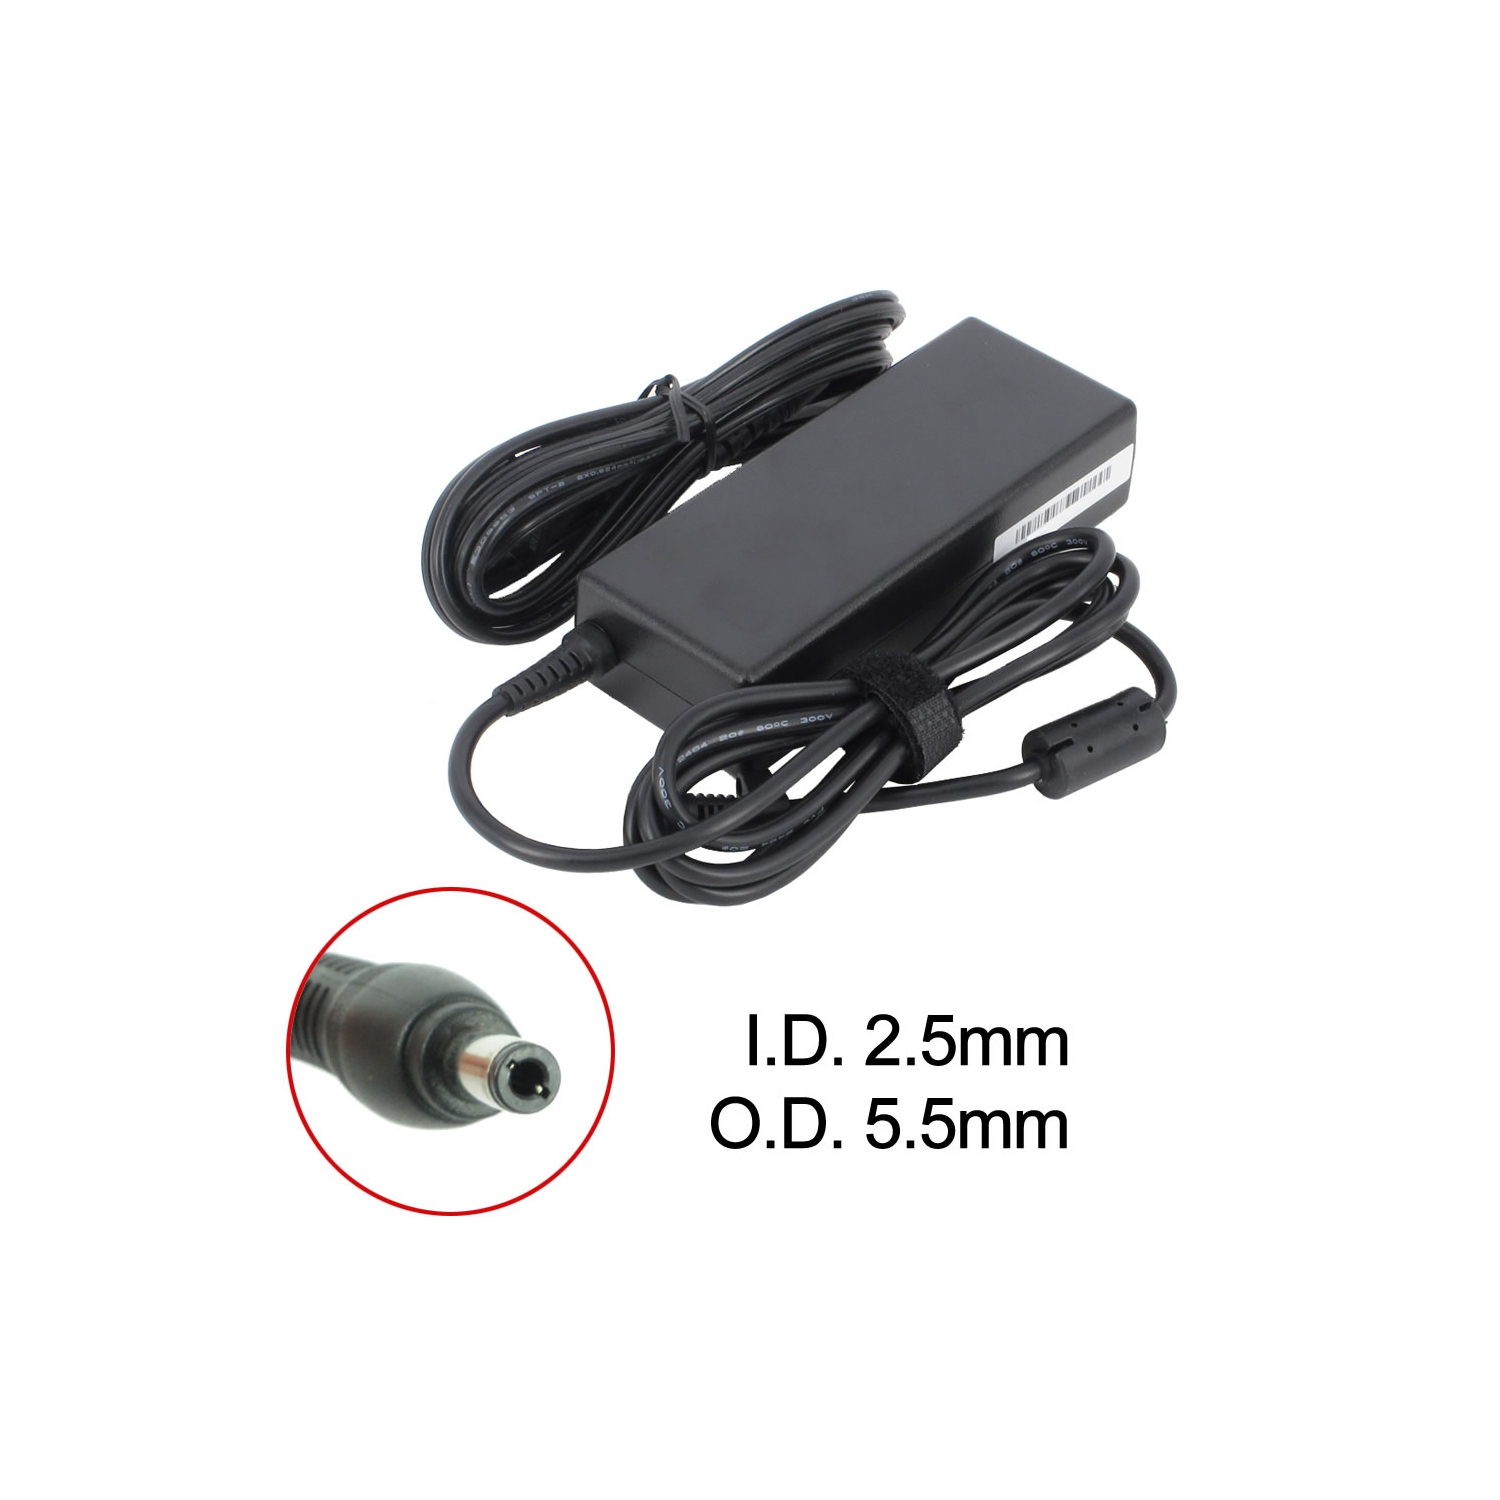 New Laptop AC Adapter for Asus Y581, 04G266008920, 310-1958, 90-N6EPW2000, API3AD030, PA-1900-03, PA3165U